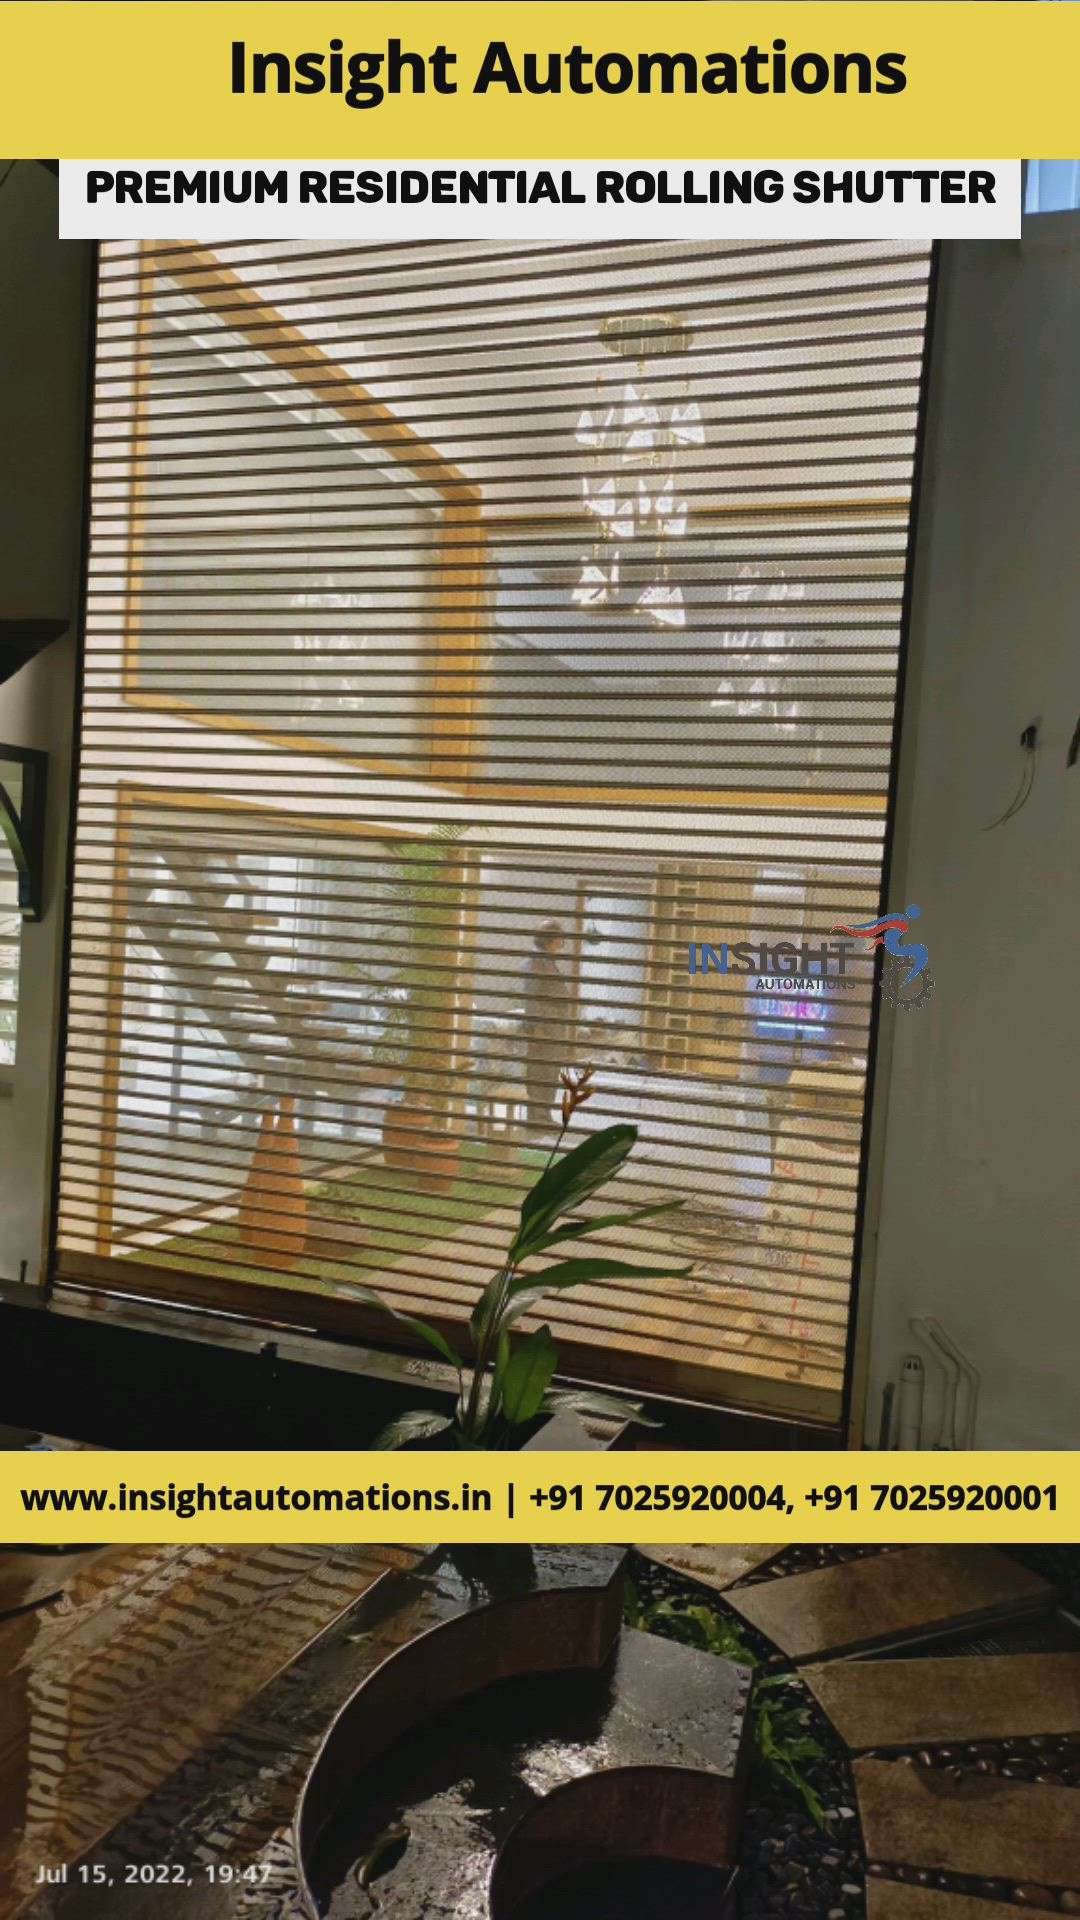 Double height Residential Safety shutters 
Contact +91 7025920004
+91 7025920001